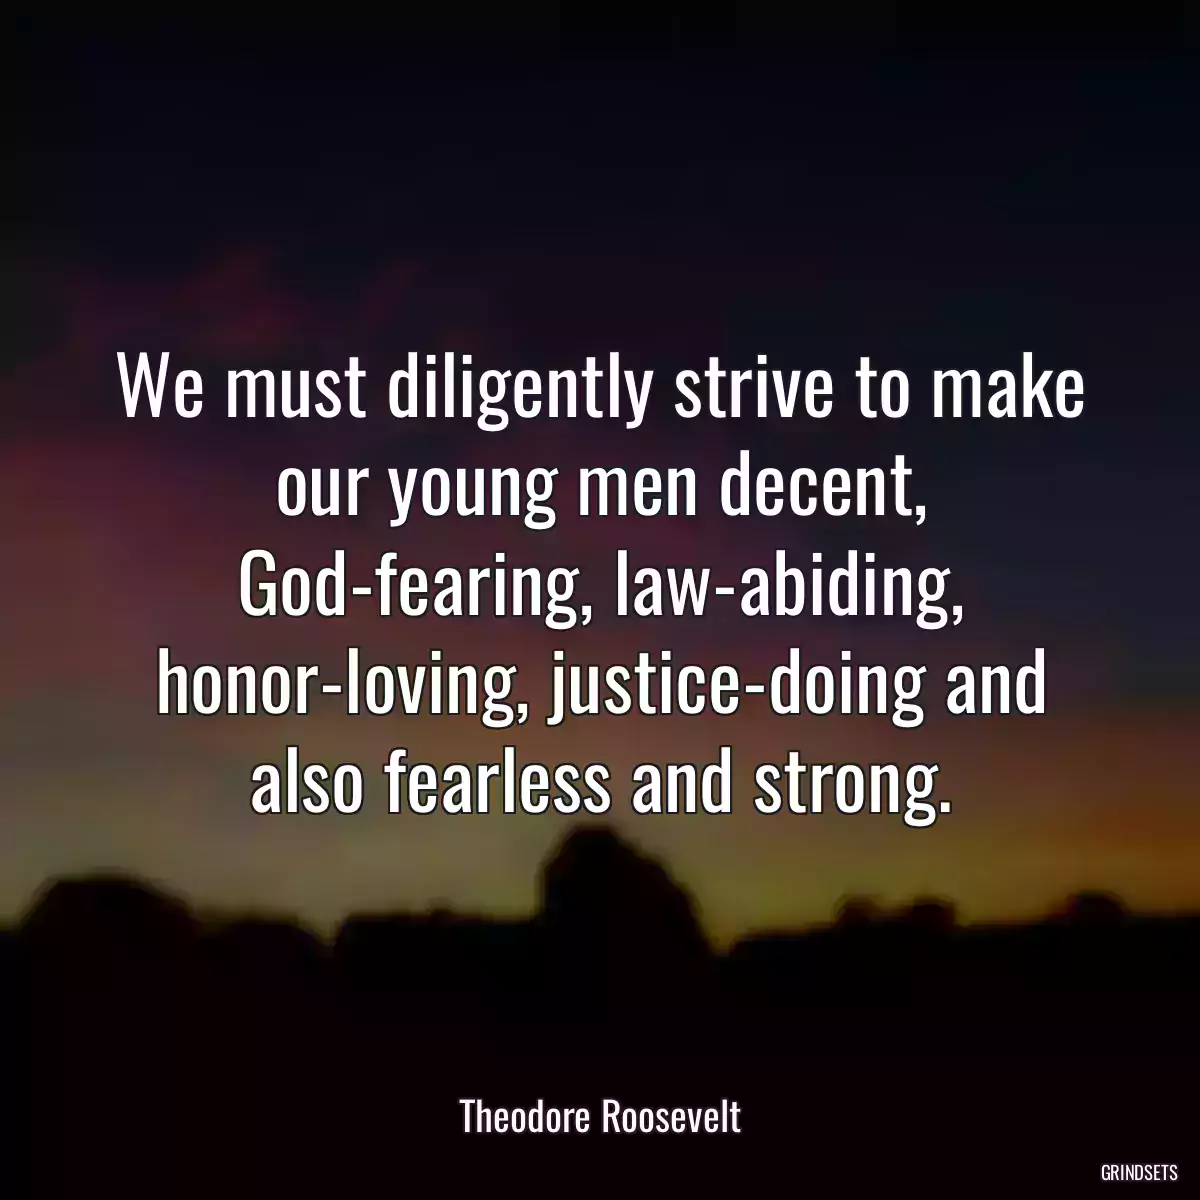 We must diligently strive to make our young men decent, God-fearing, law-abiding, honor-loving, justice-doing and also fearless and strong.